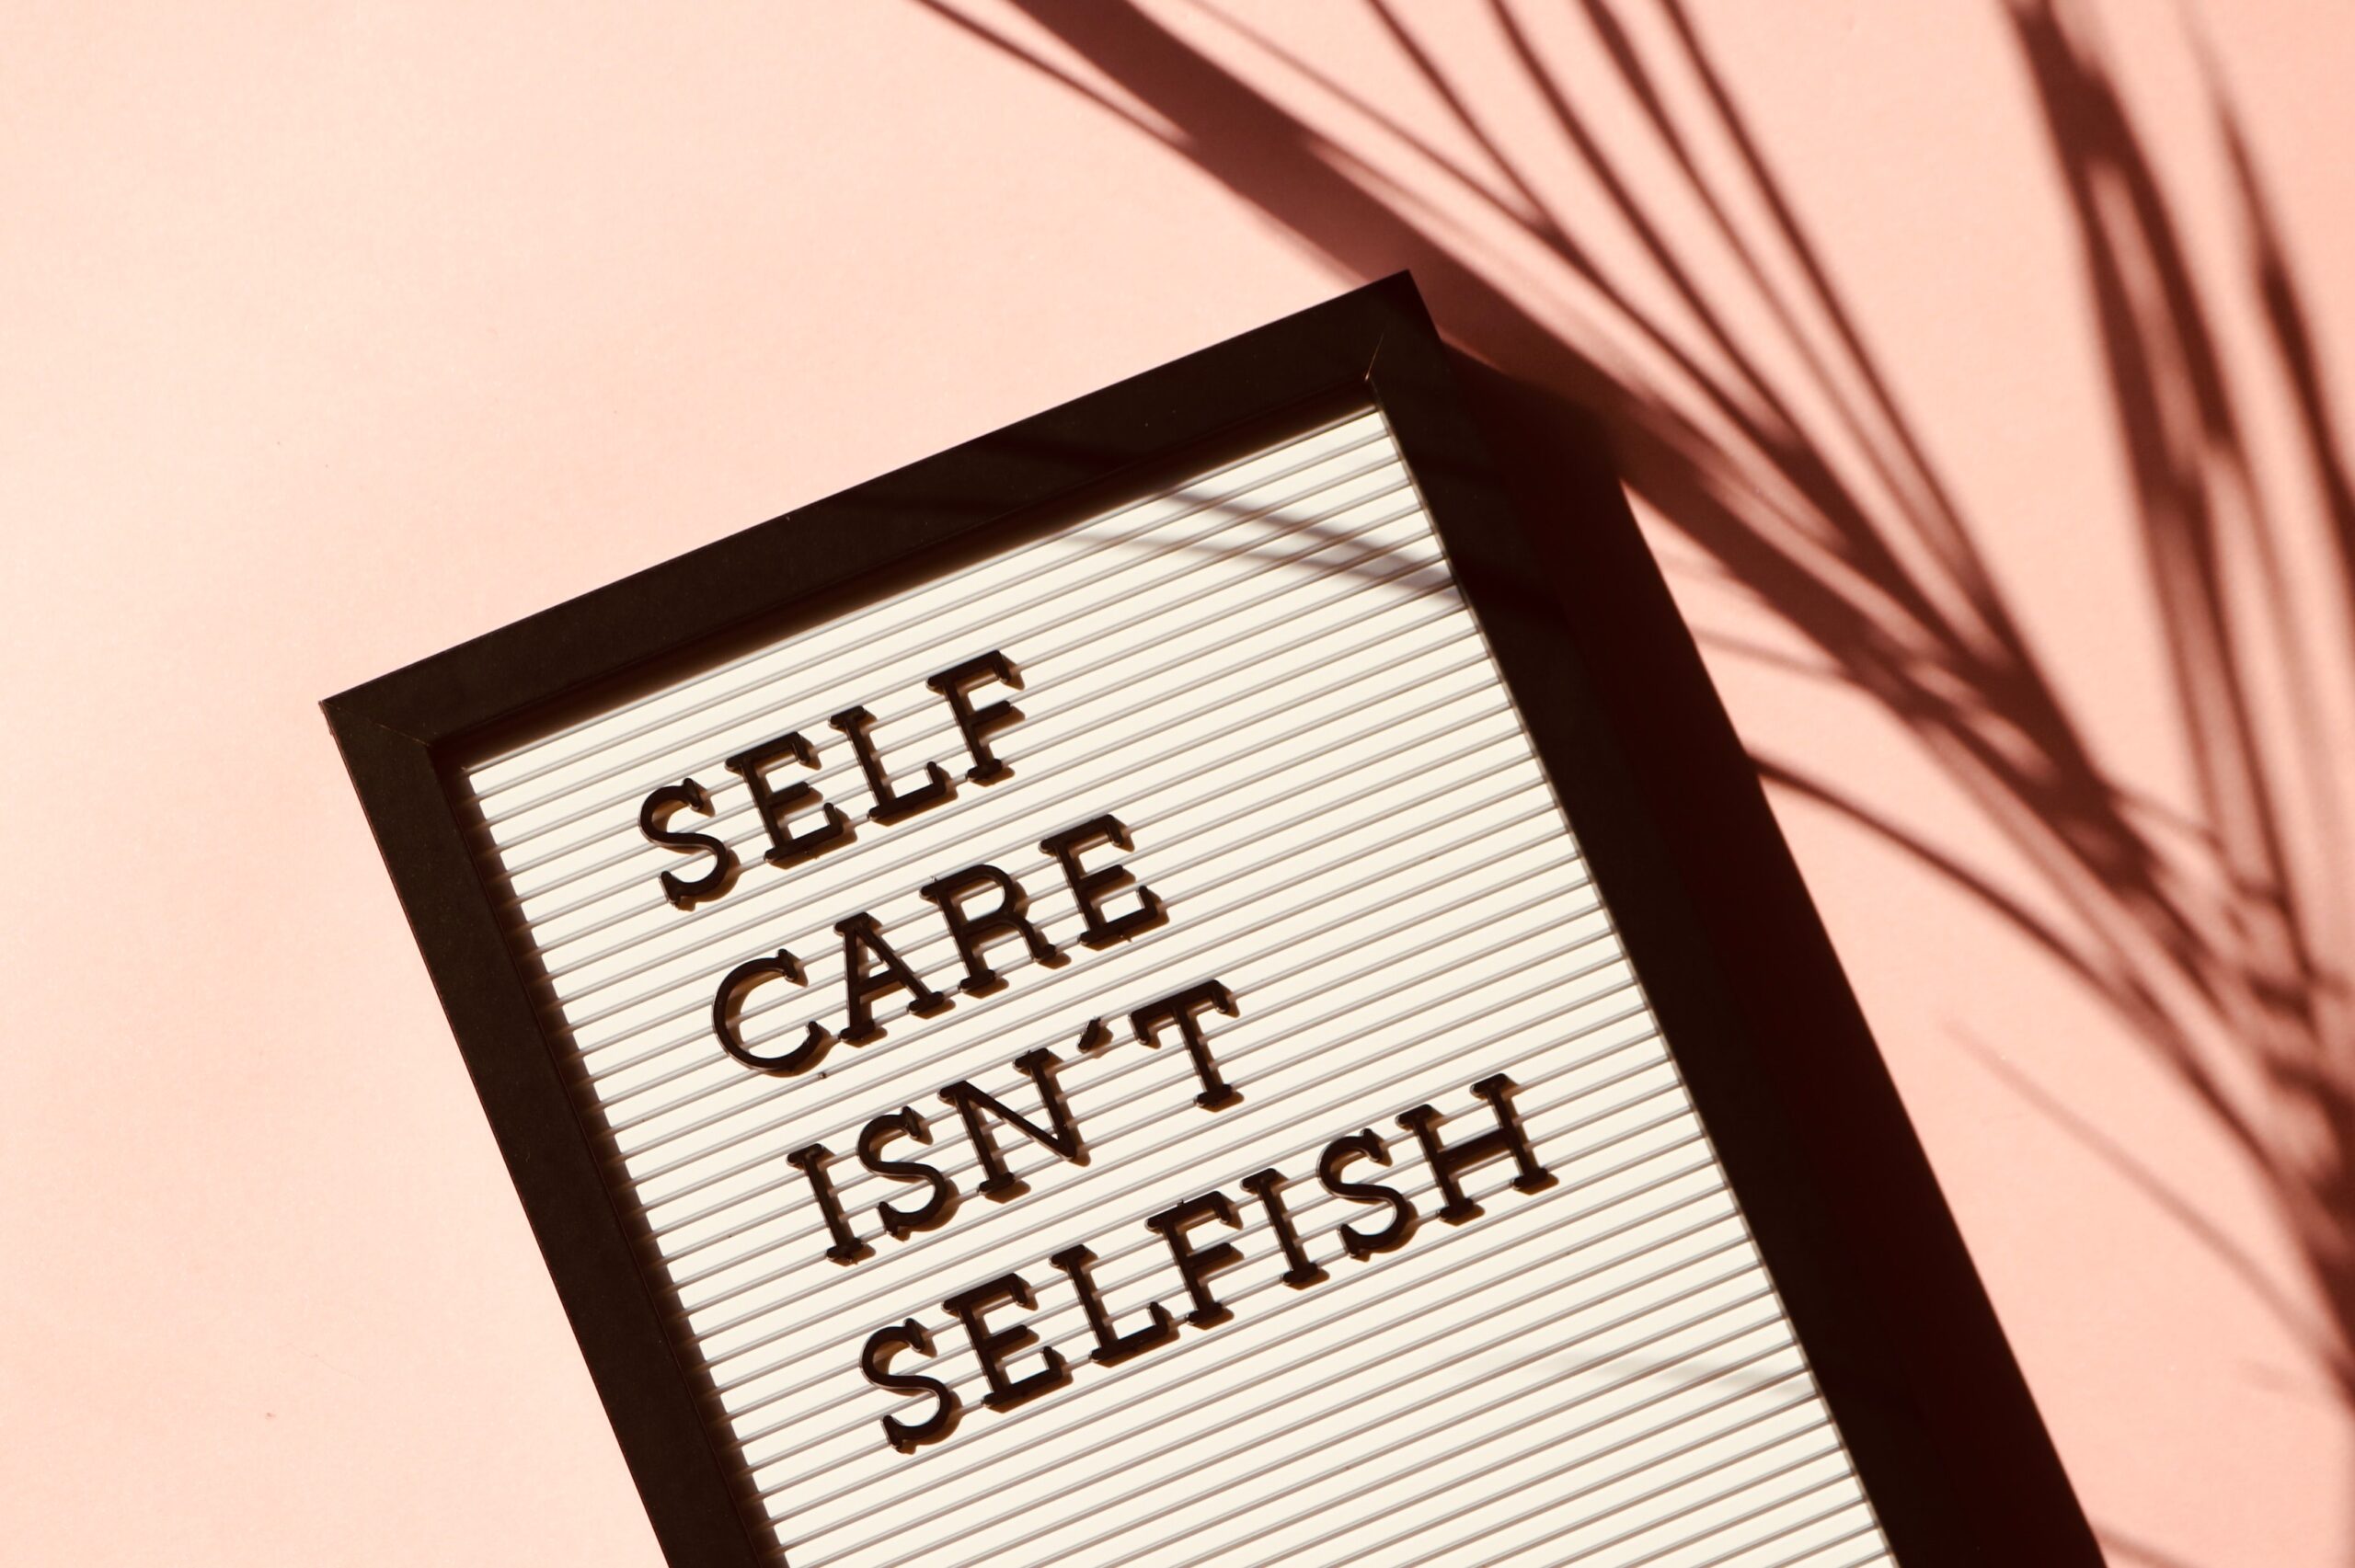 The image shows a message board laid flat saying "self care isn't selfish"